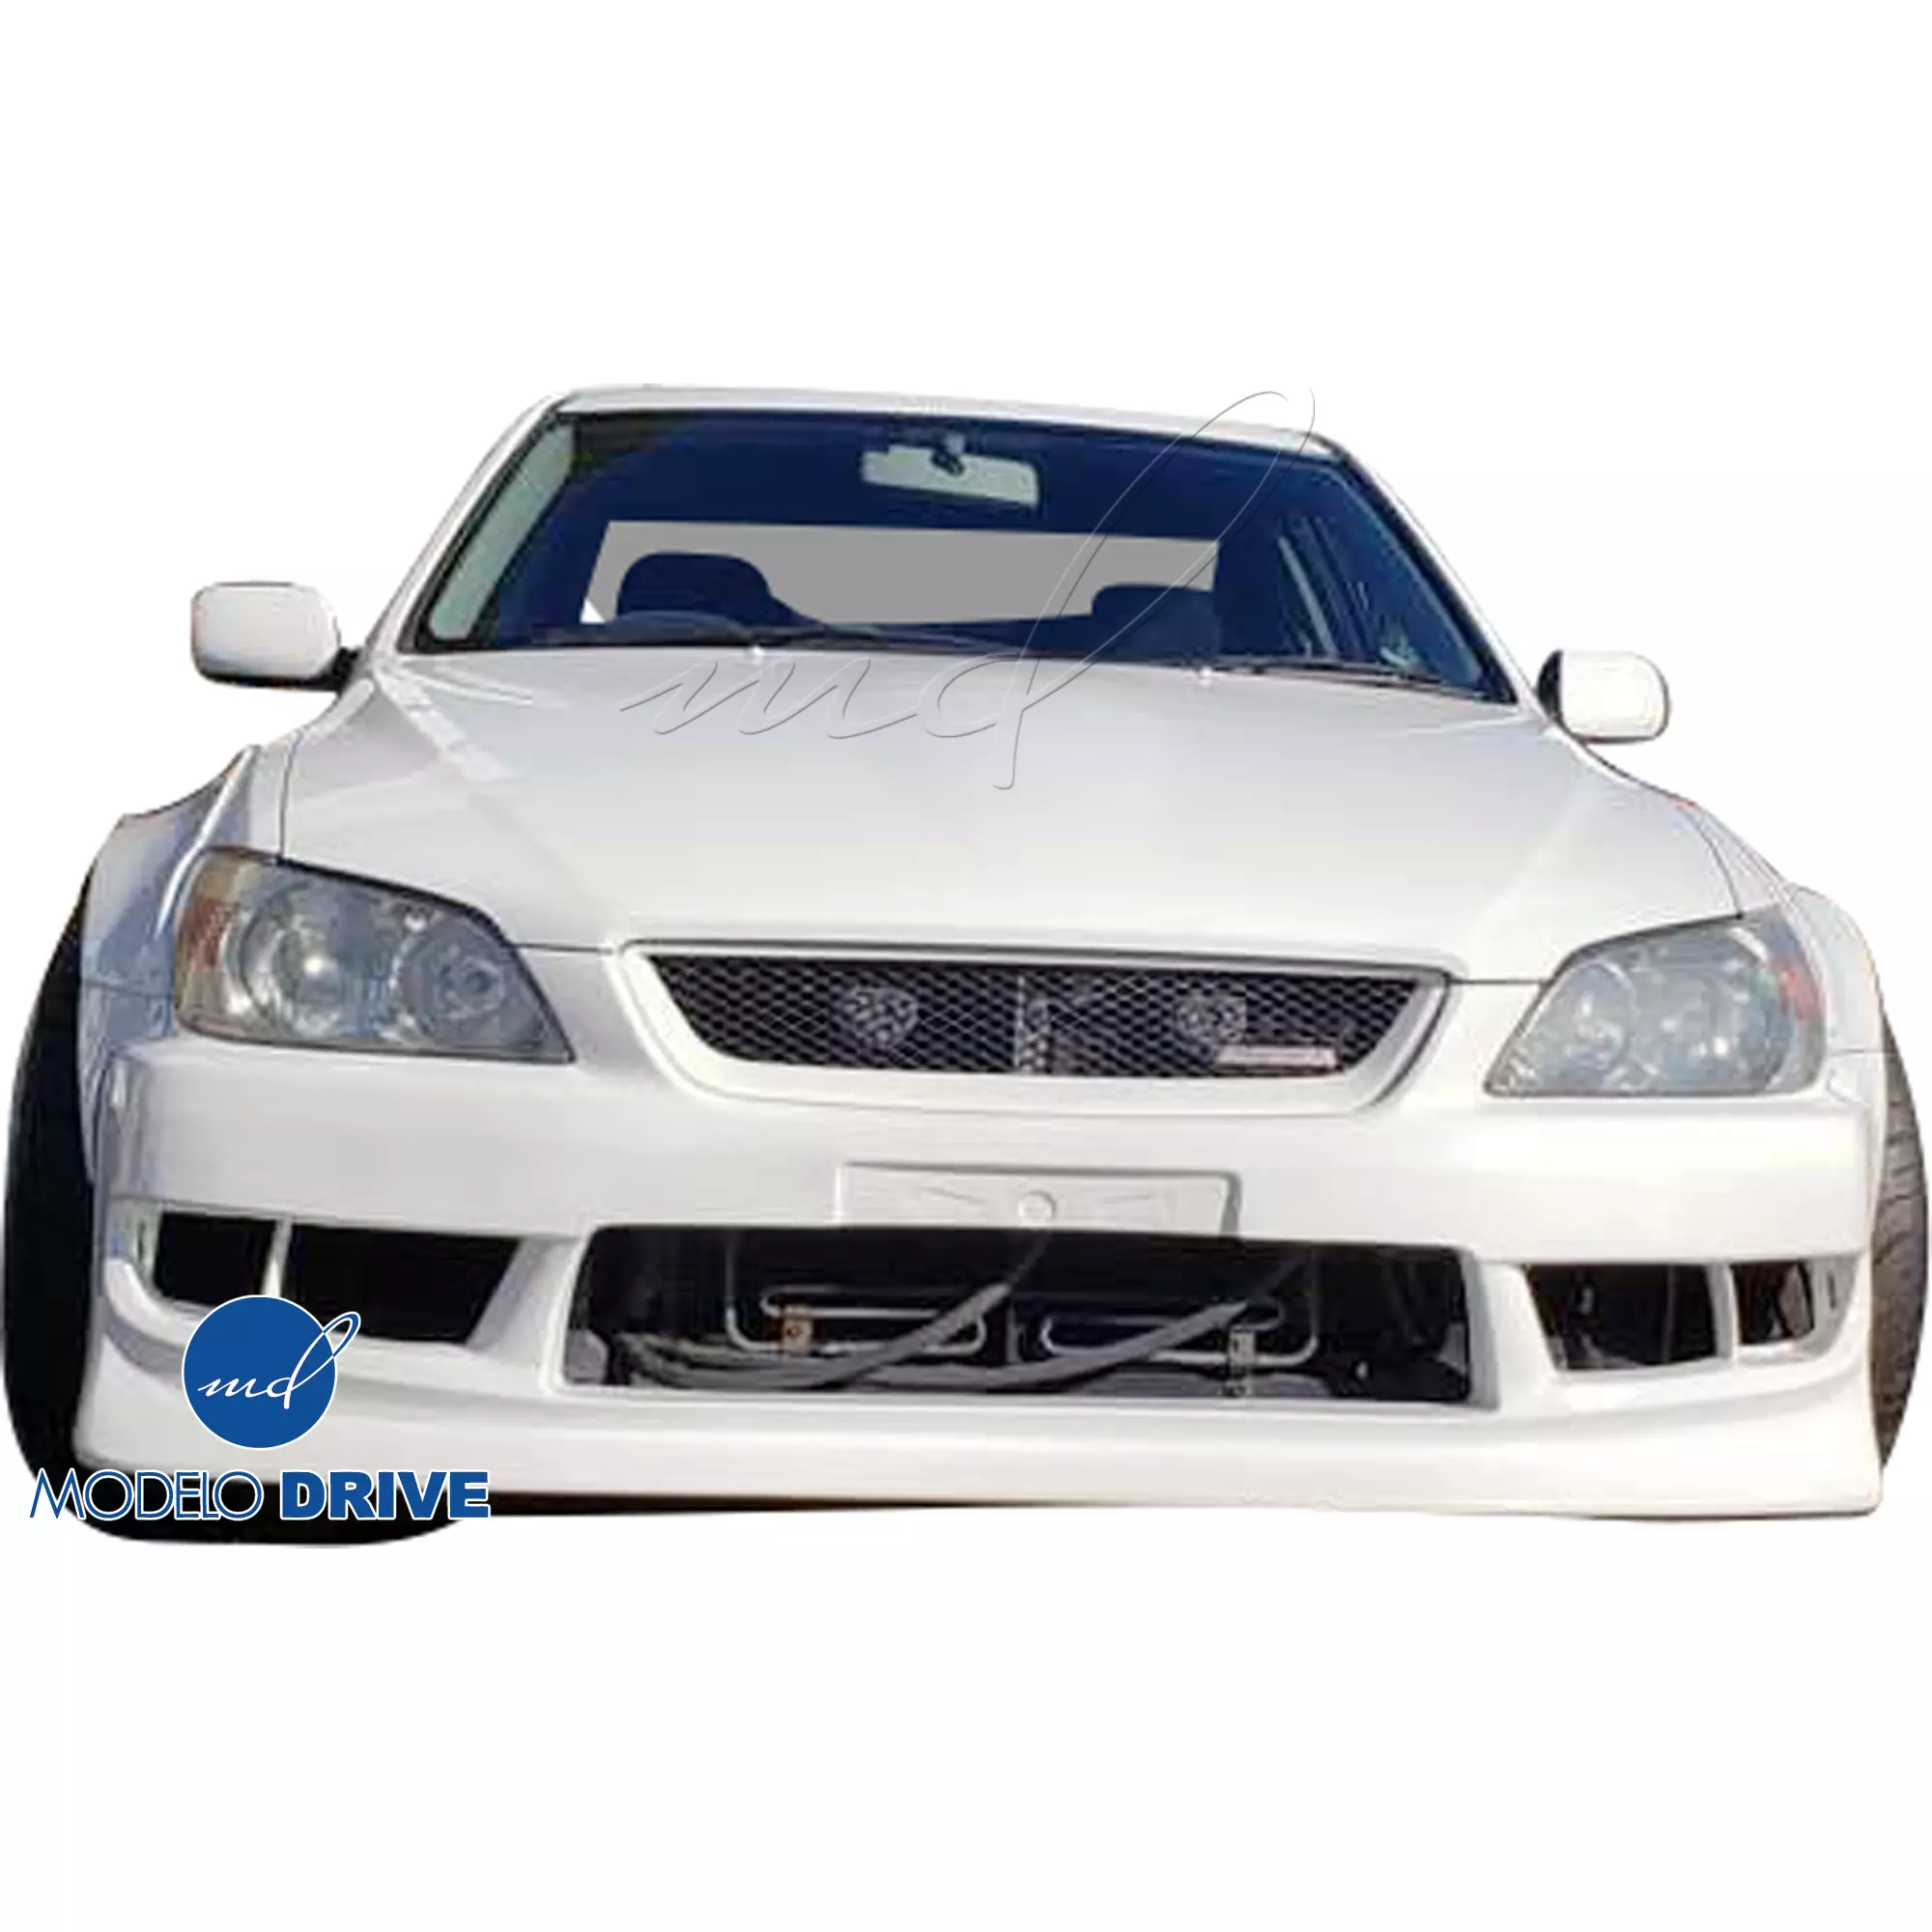 ModeloDrive FRP MSV Wide Body 30/65 Fender Flare Set 8pc > Lexus IS Series IS300 2000-2005> 4dr - Image 4